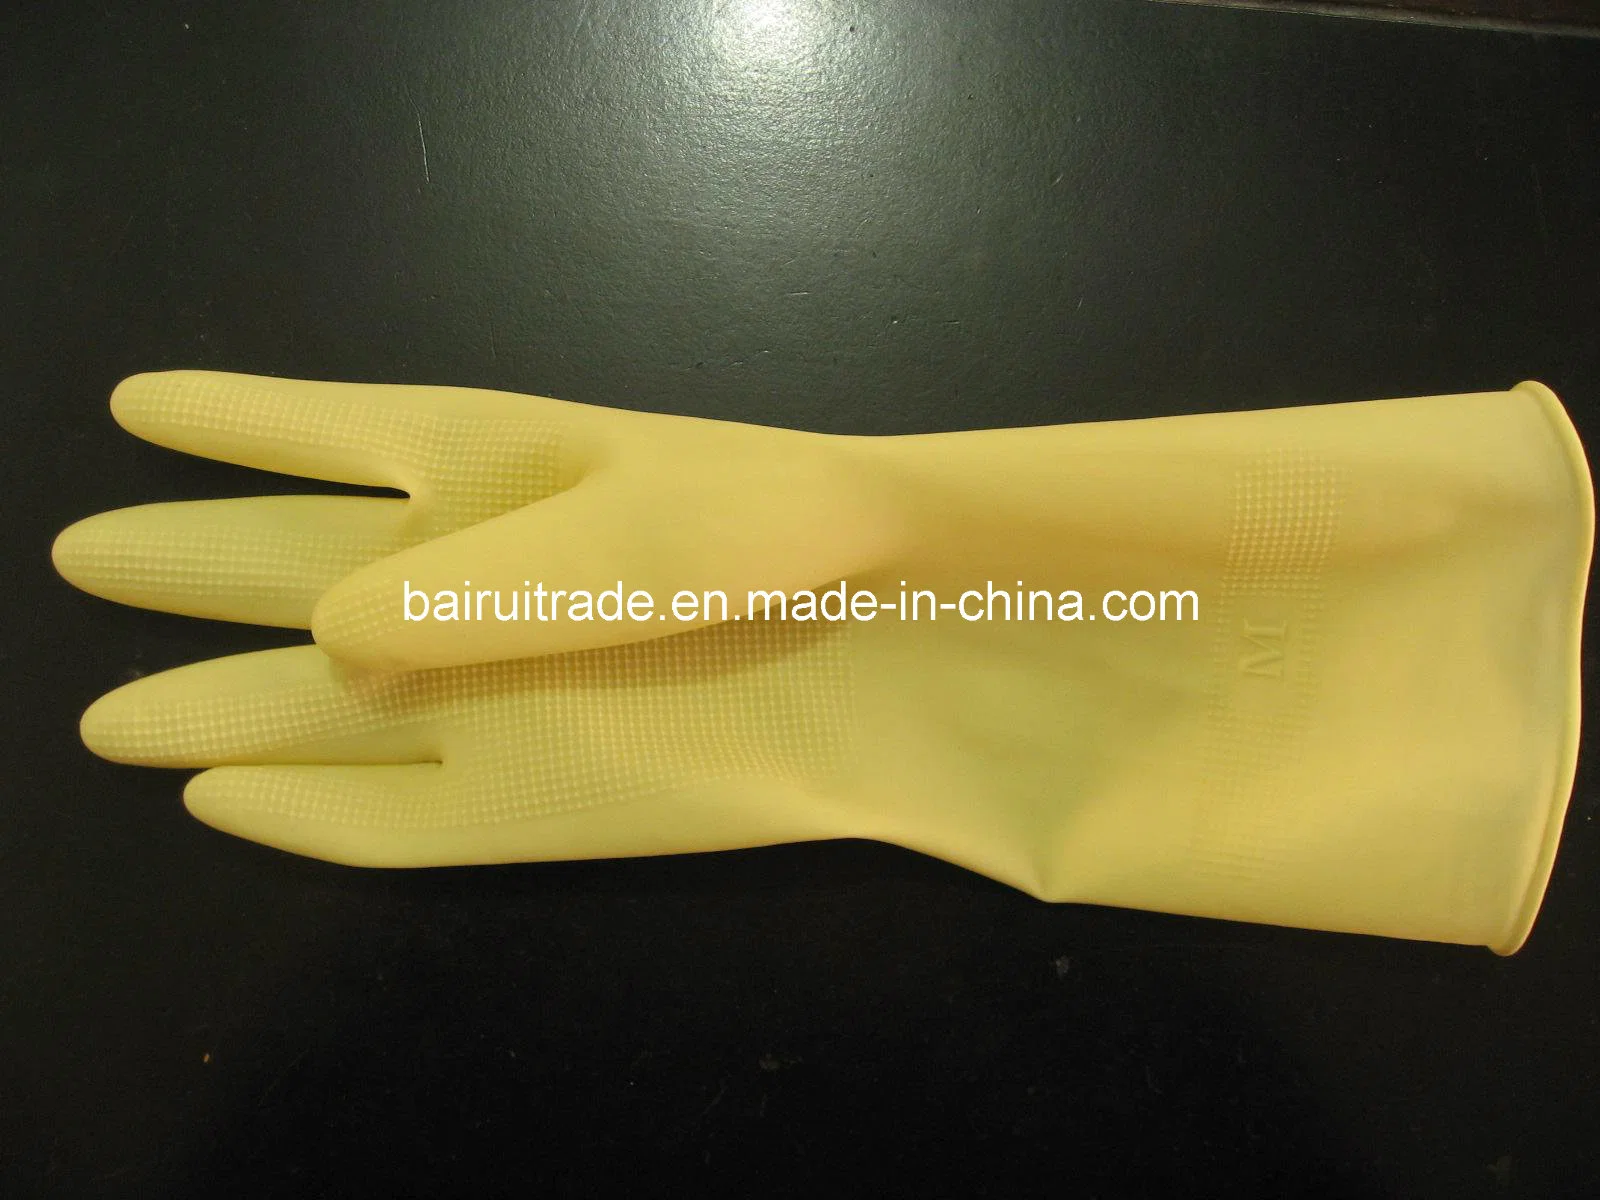 Low Price Work Rubber Glove for Housework